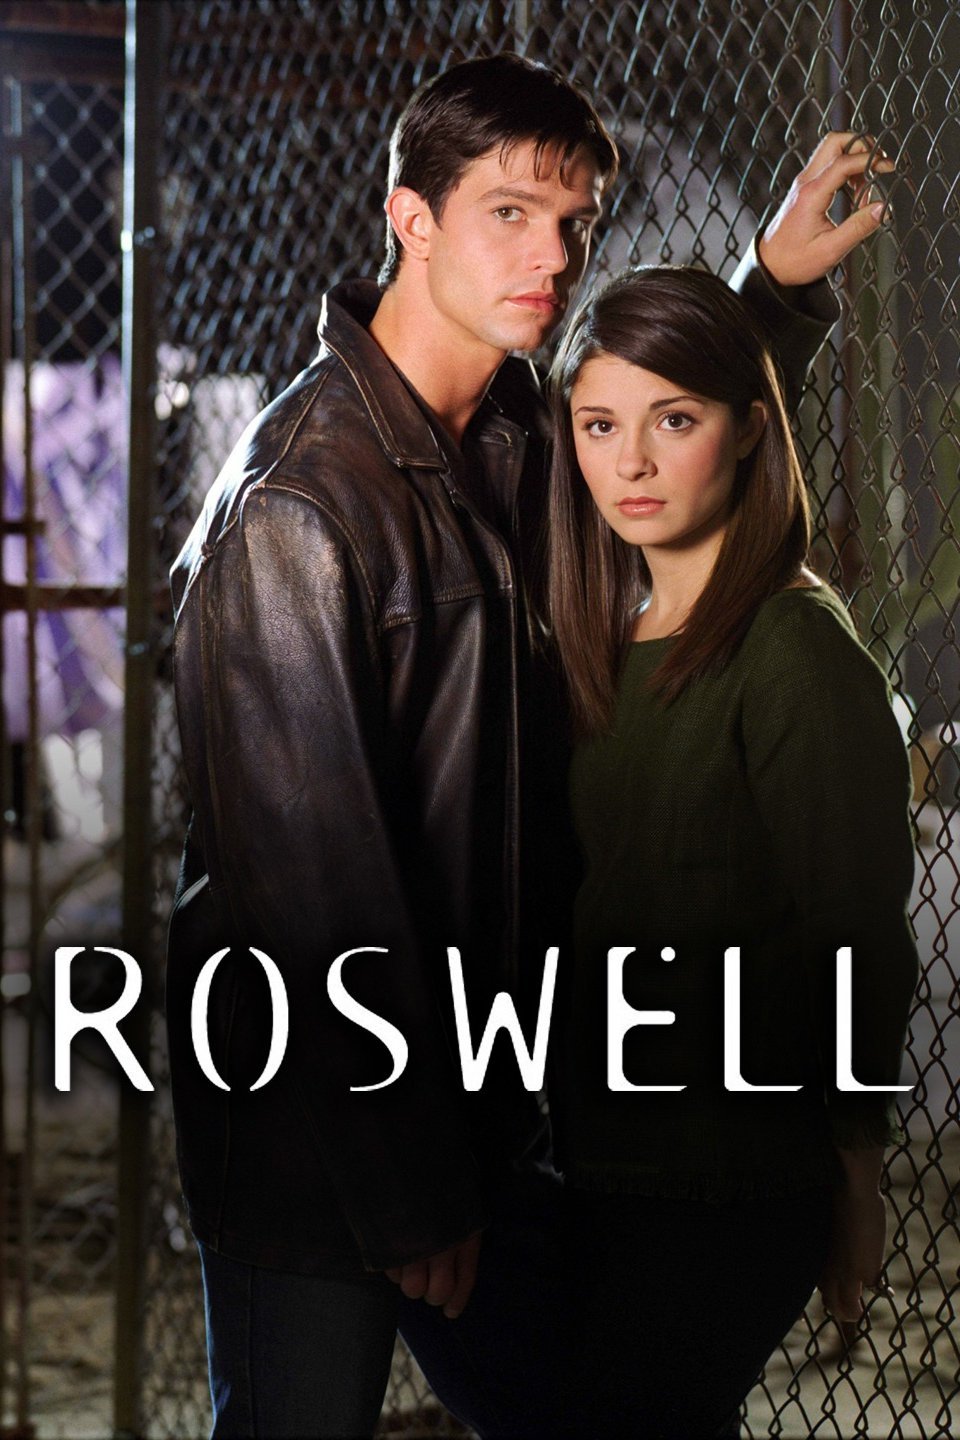 Roswell and threesomes fanfiction